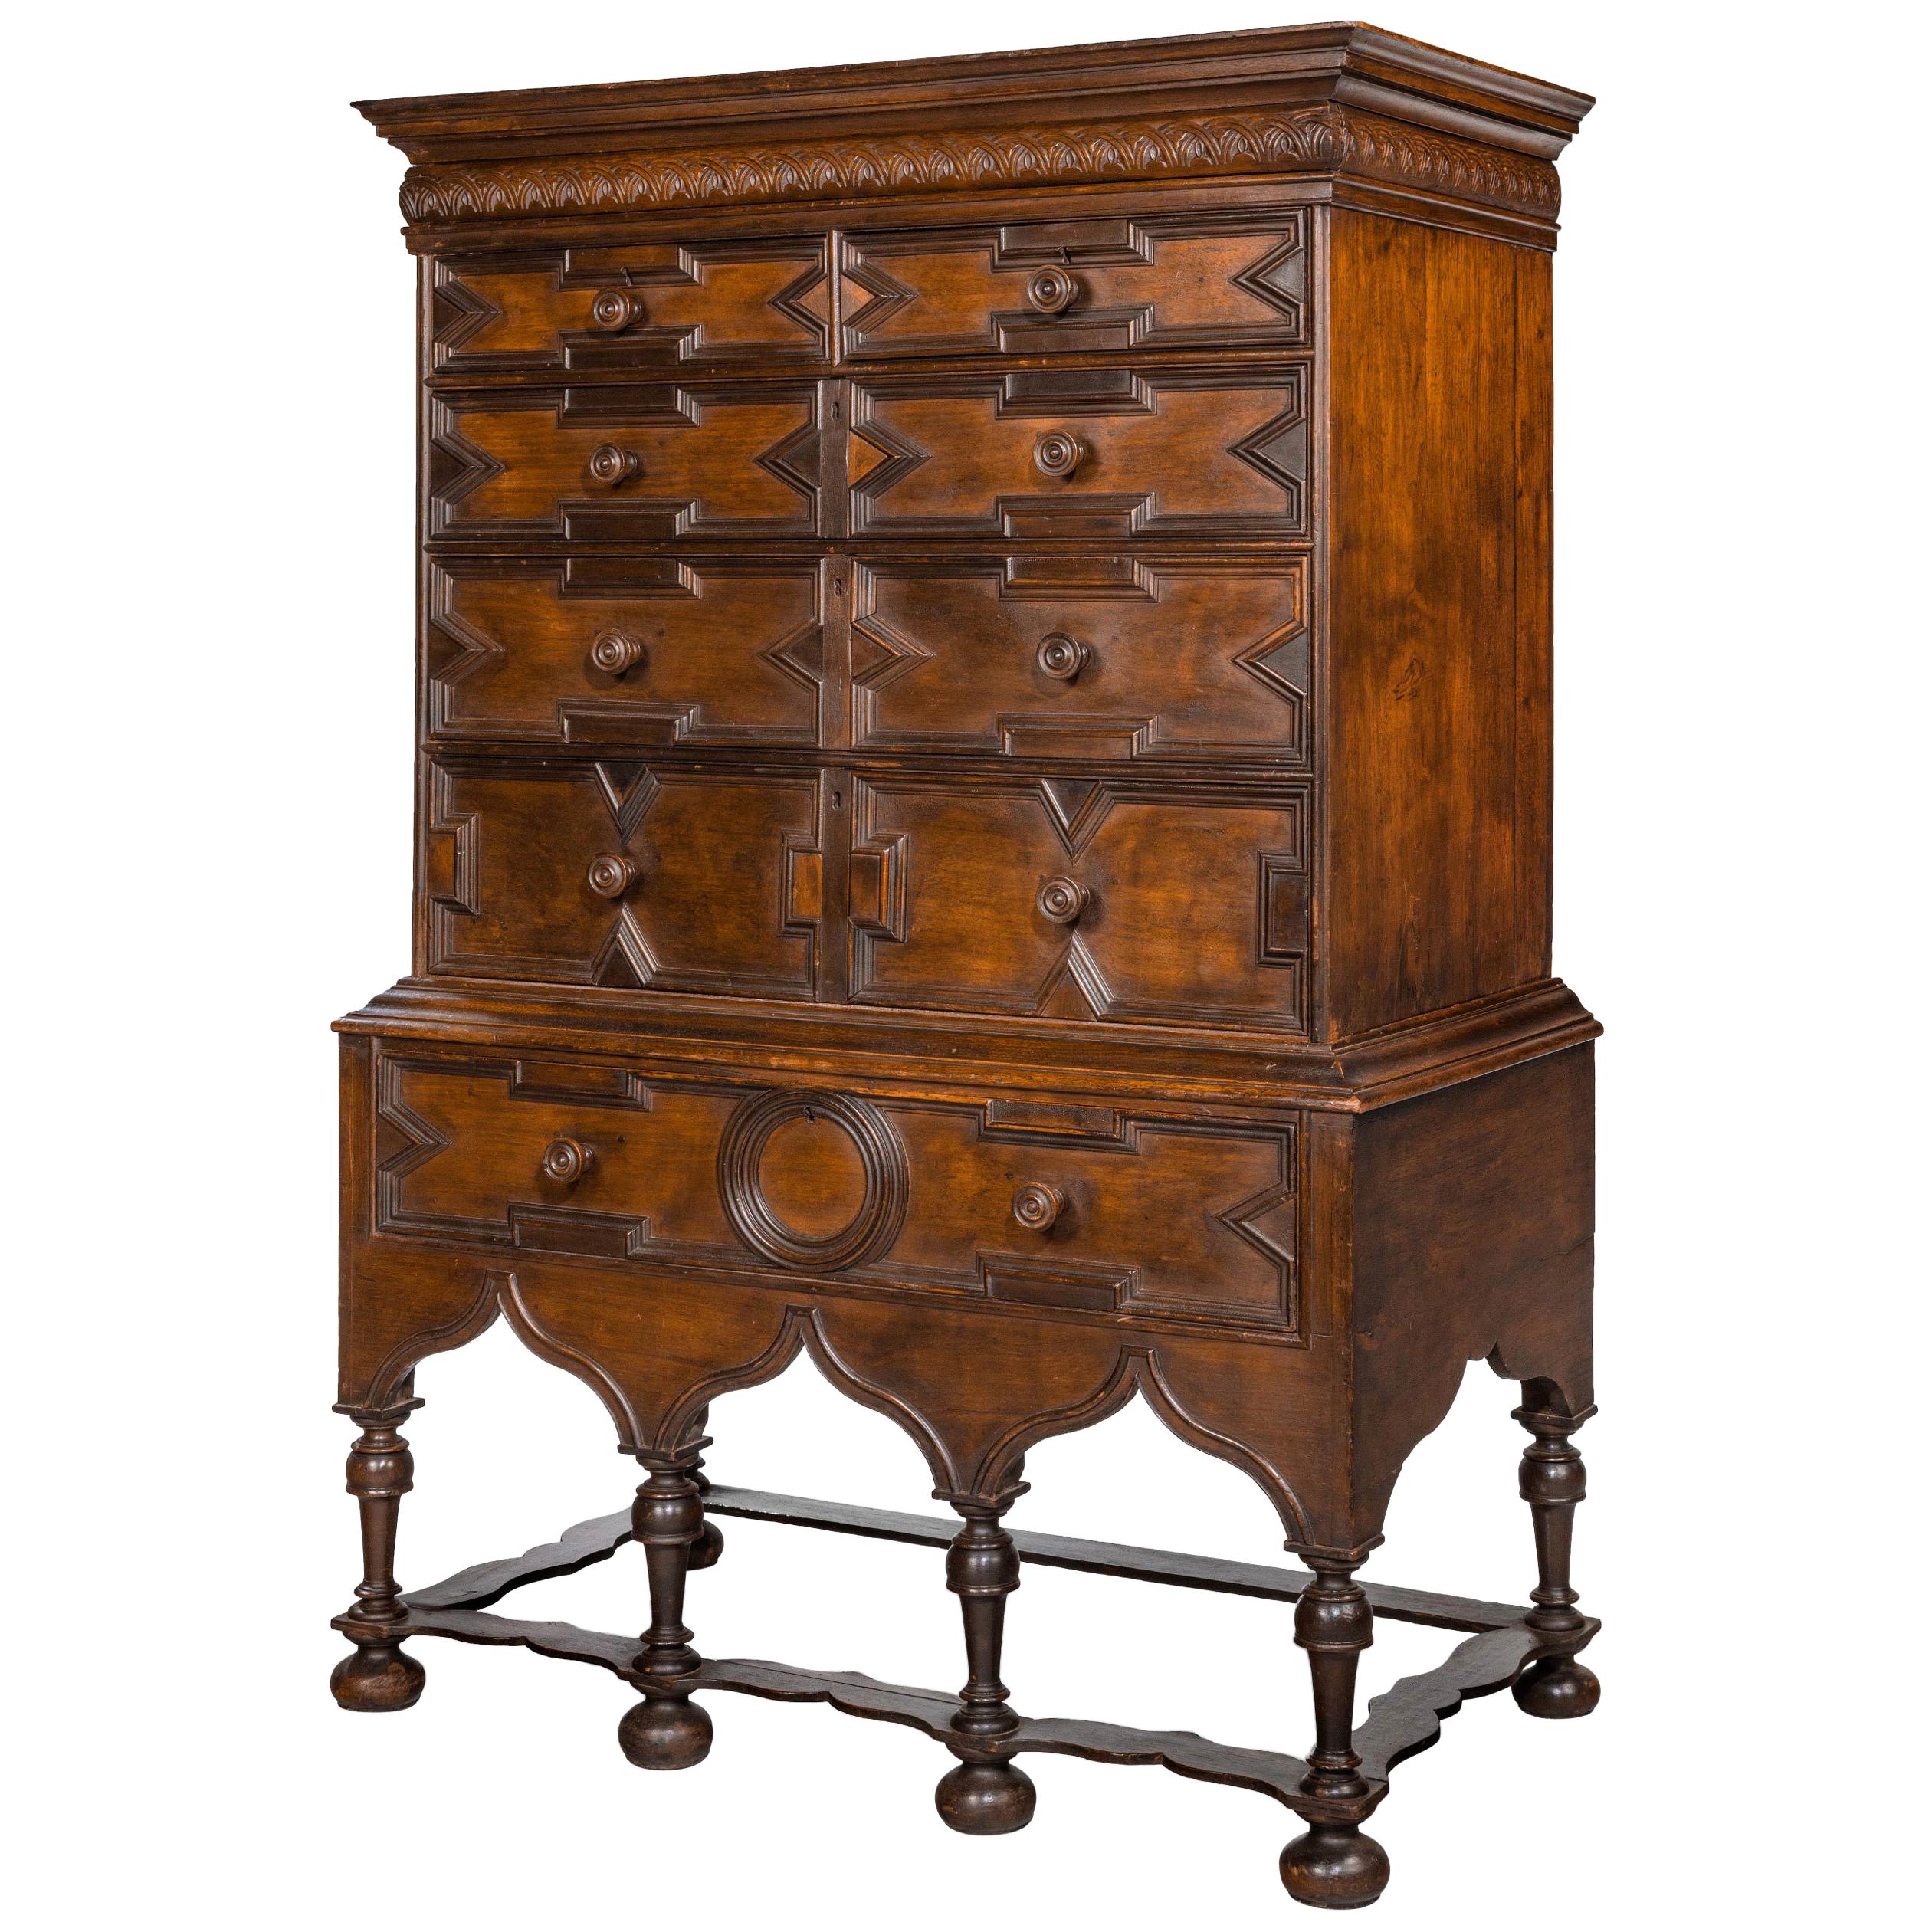 Rare William and Mary Period Solid Walnut Chest on Stand